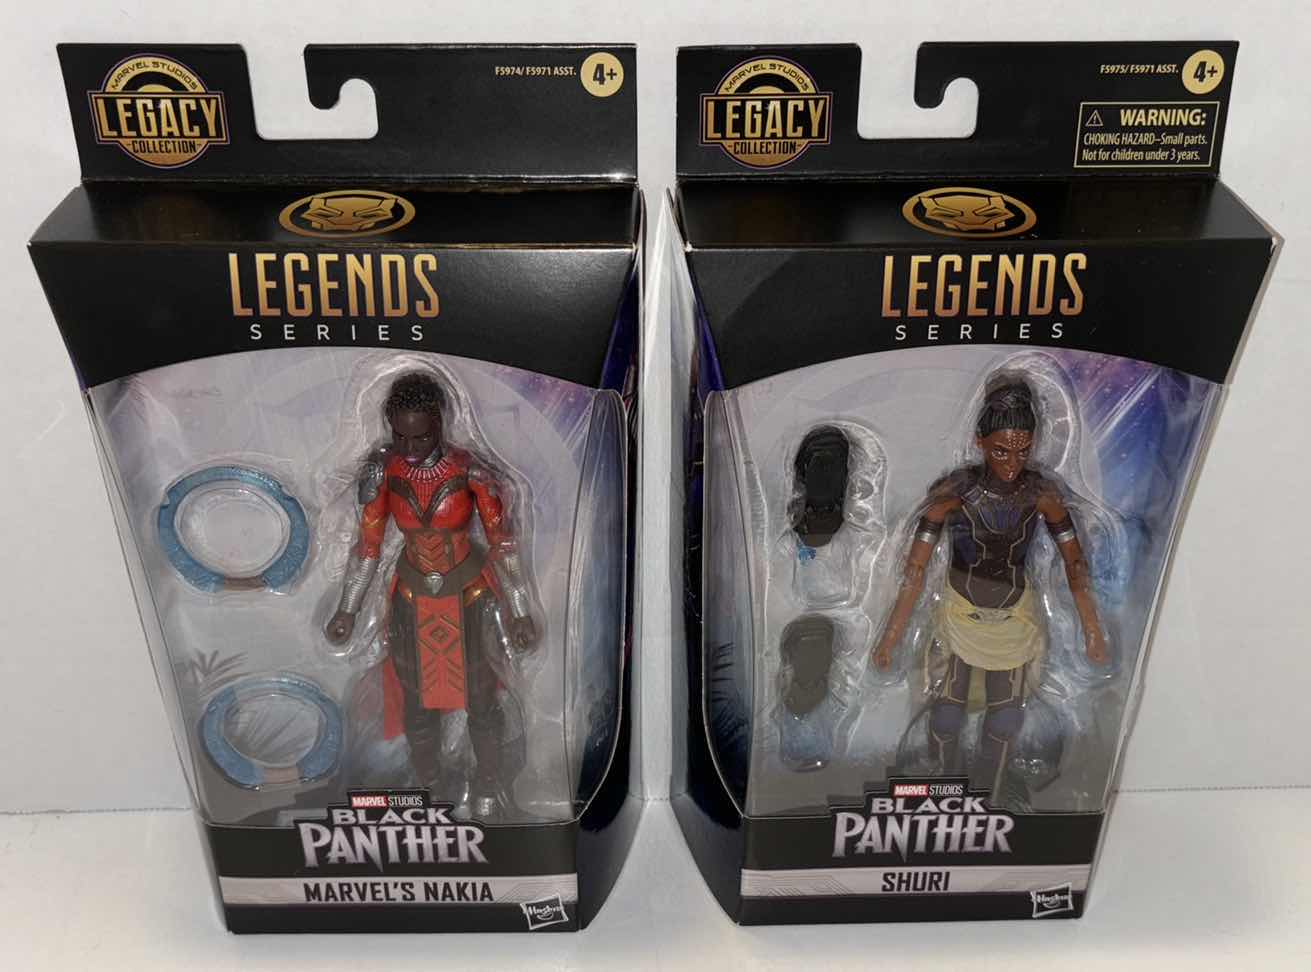 Photo 1 of NEW 2-PACK HASBRO MARVEL STUDIOS LEGACY COLLECTION LEGENDS SERIES BLACK PANTHER ACTION FIGURE & ACCESSORIES, “MARVEL’S NAKIA” & “SHURI”